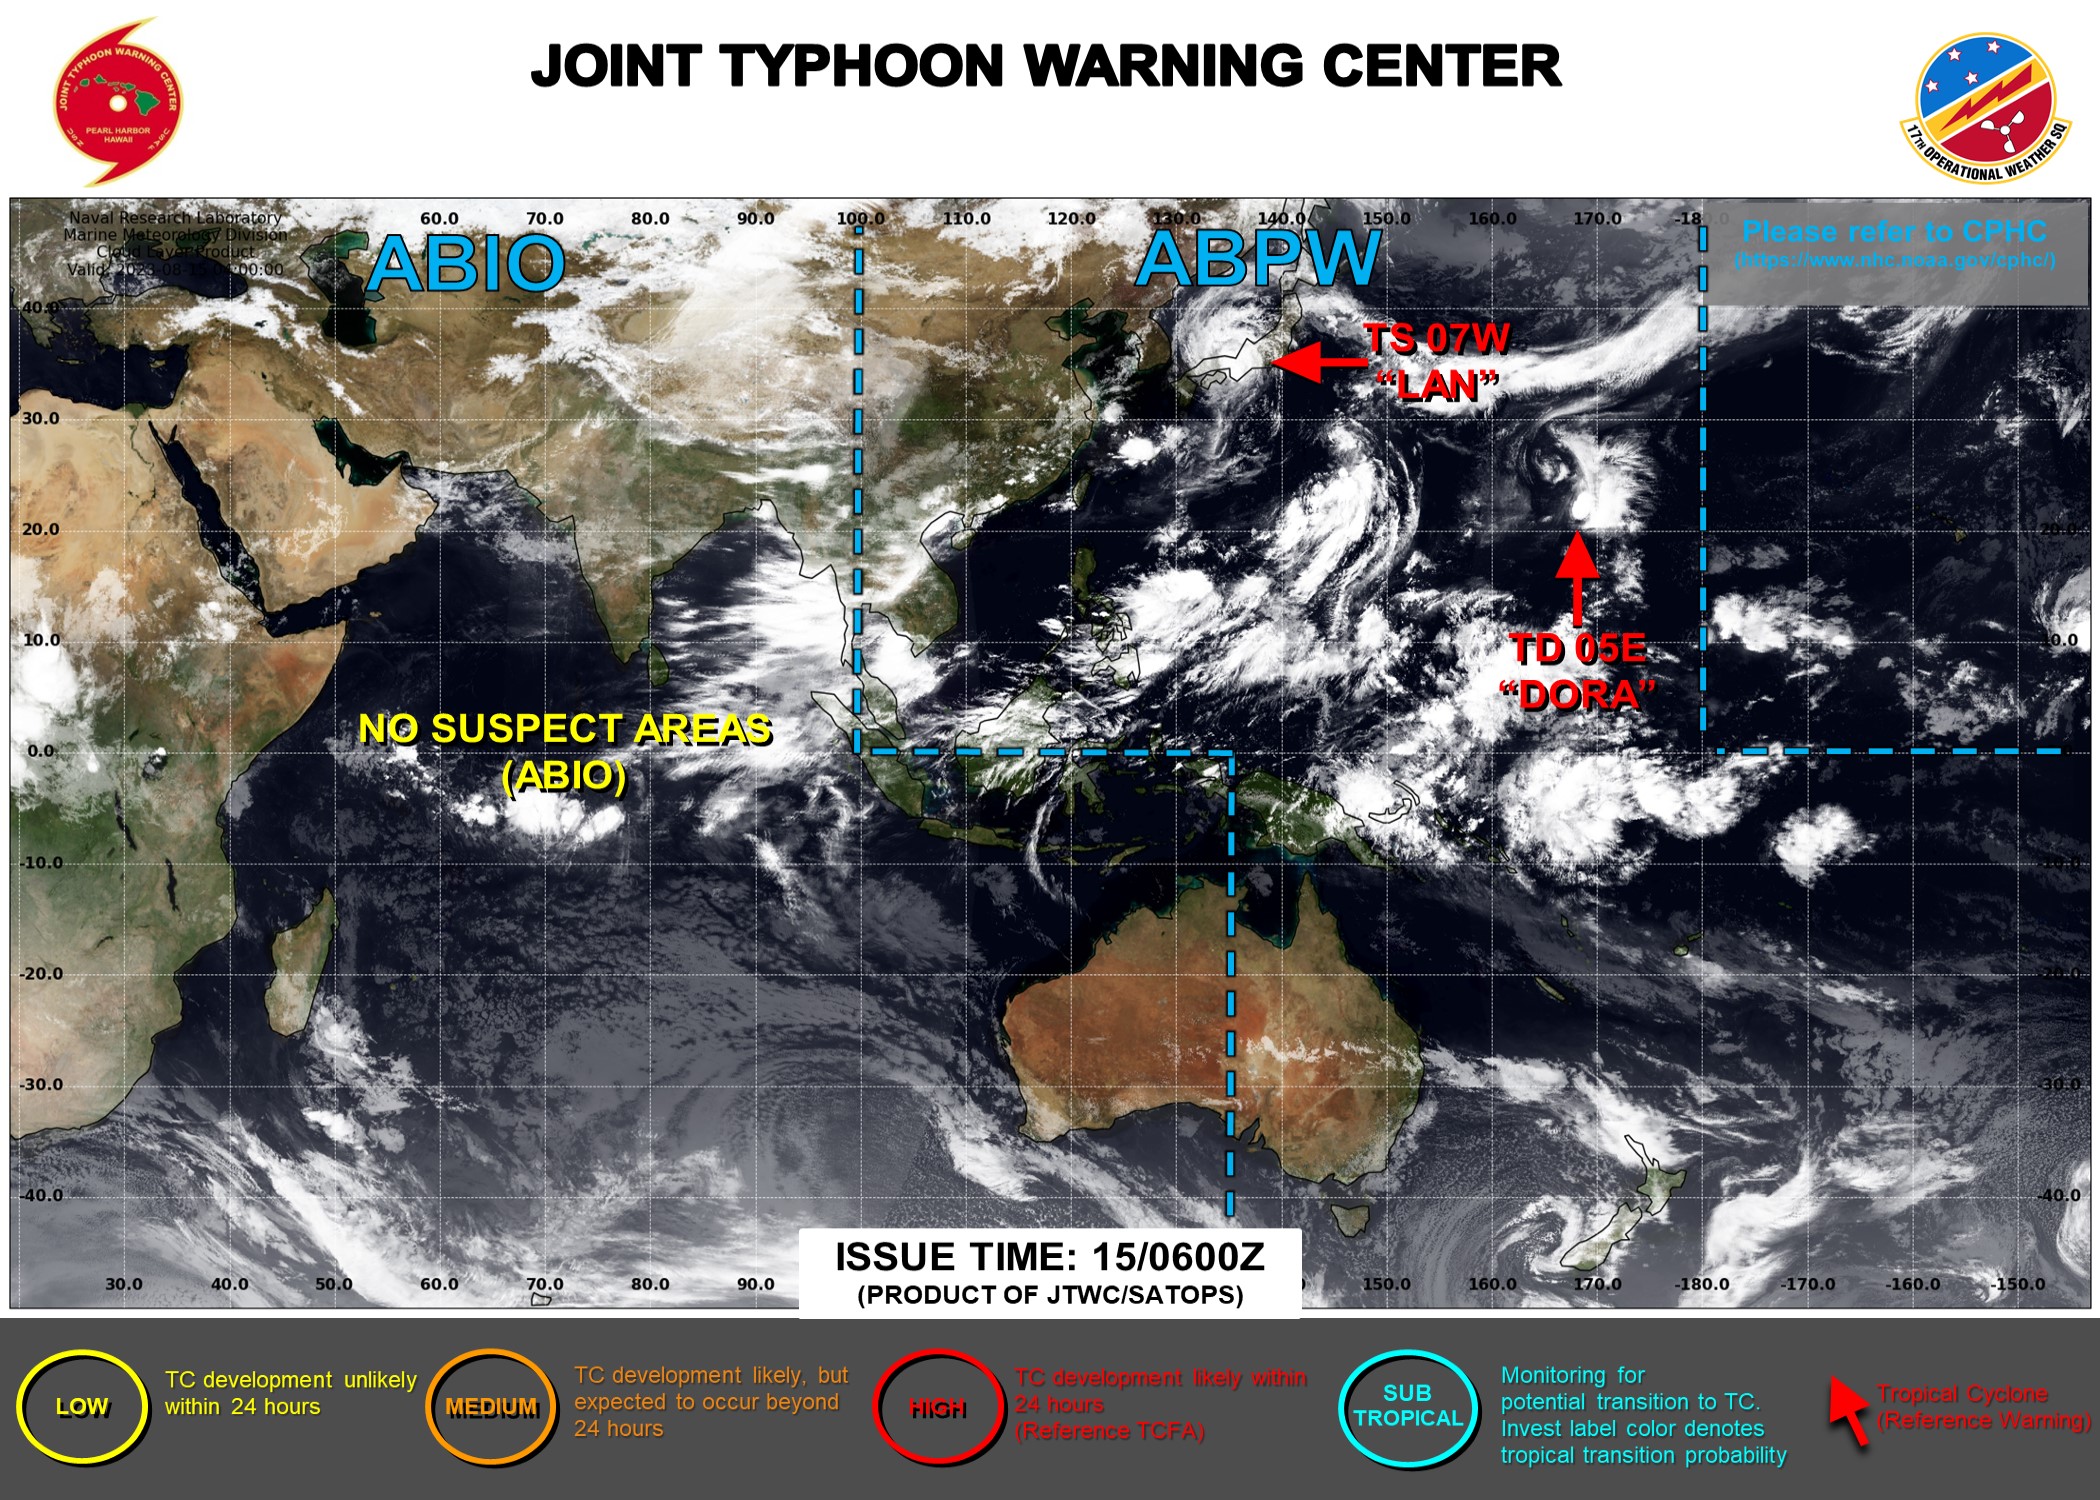 JTWC IS ISSUING 6HOURLY WARNINGS AND 3HOURLY SATELLITE BULLETINS ON 07W(LAN) ON 05E(DORA) AND ON 08E(GREG).